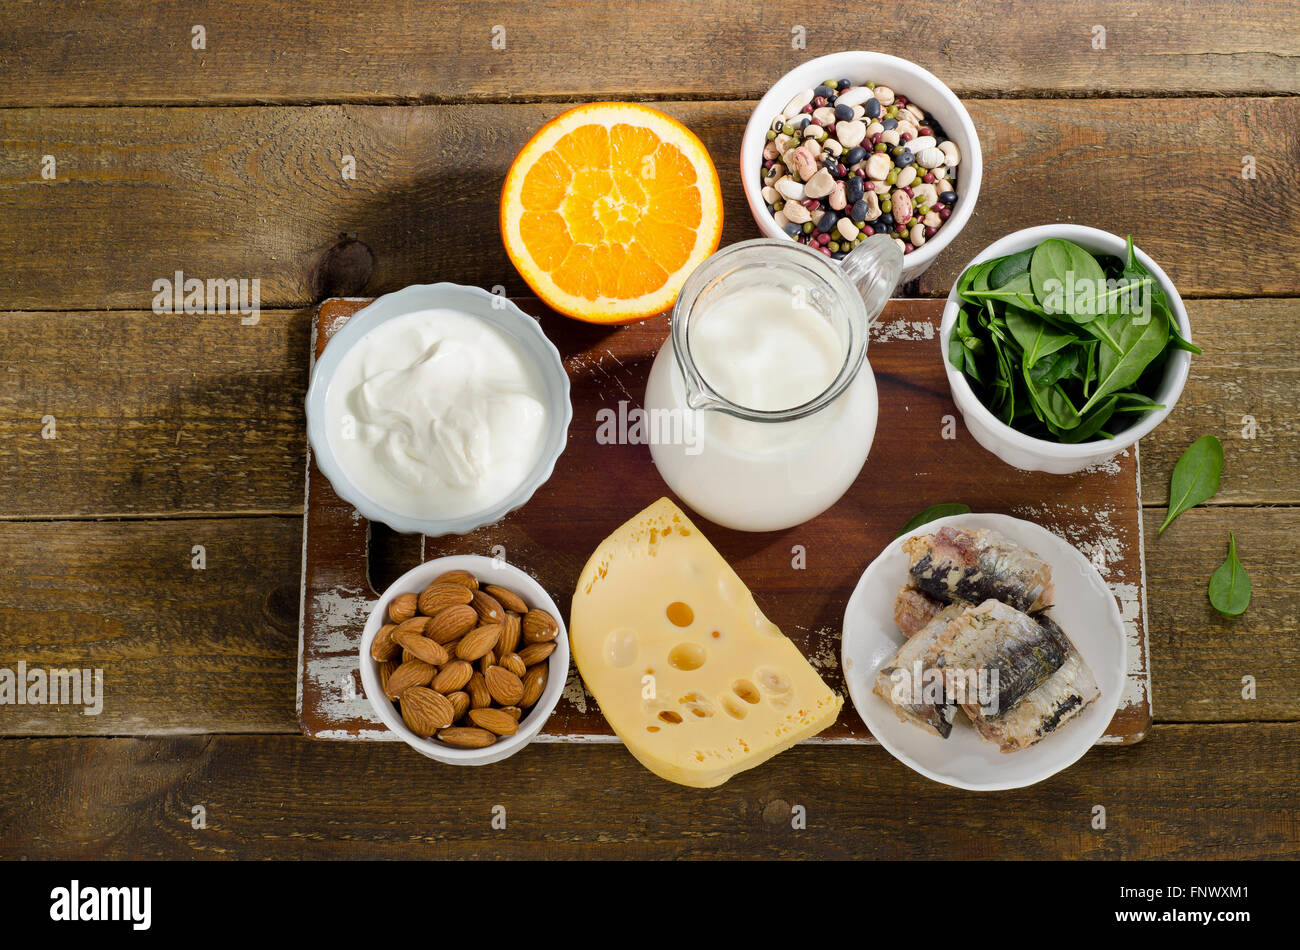 Food Sources of Calcium. Healthy eating. Top view Stock Photo